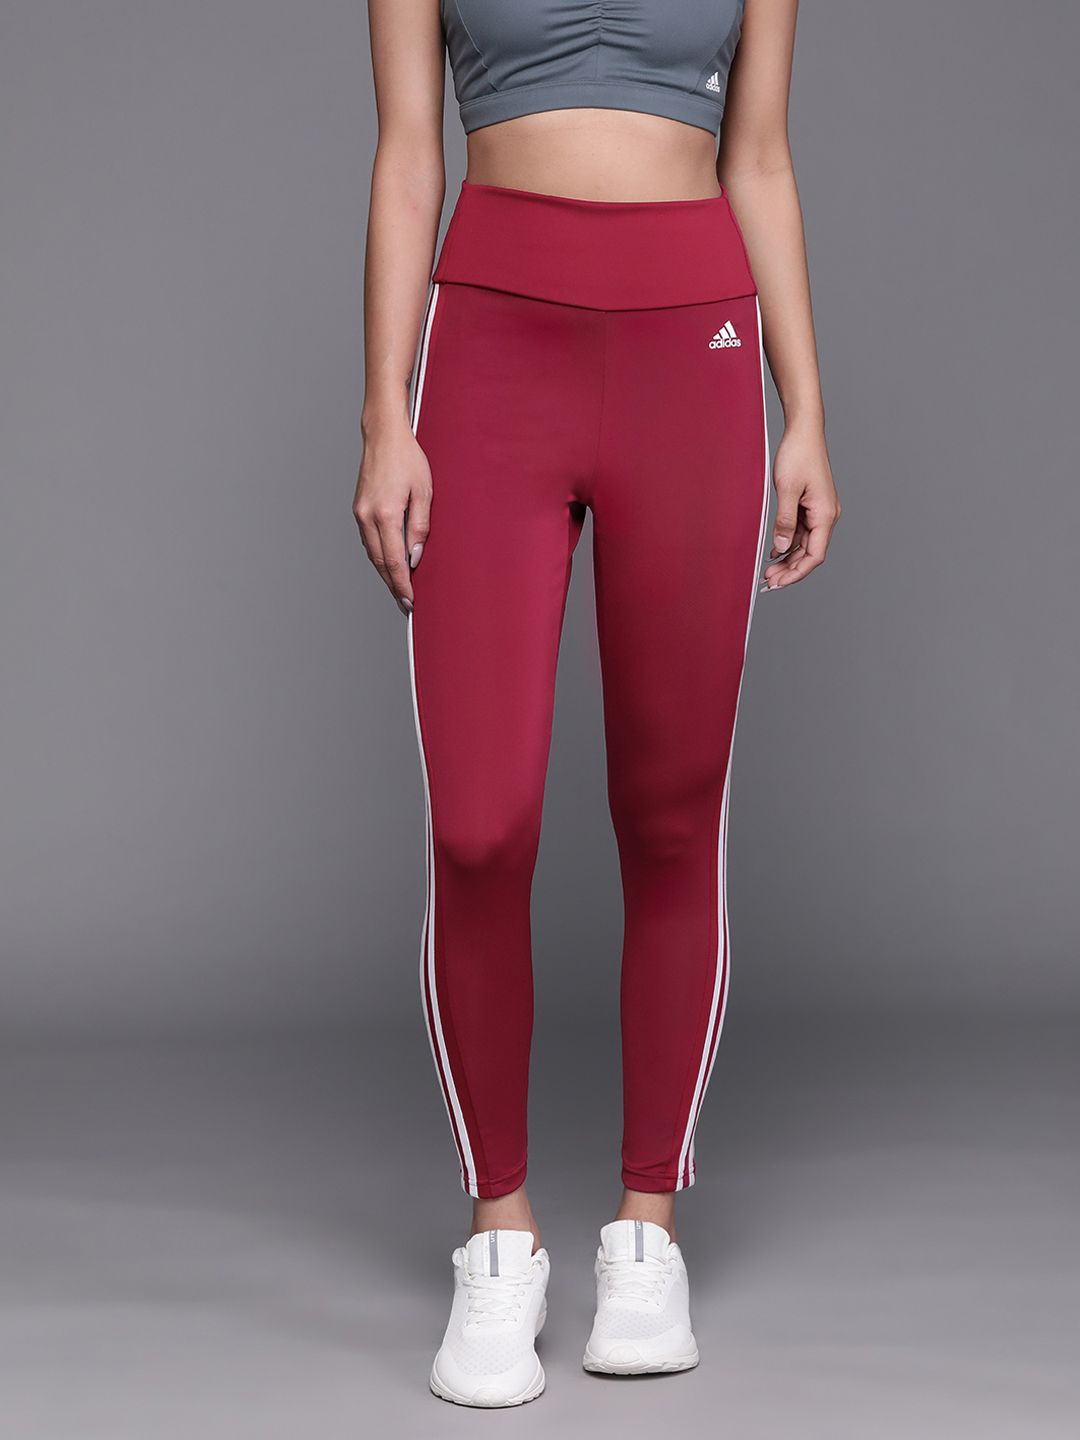 ADIDAS Women Maroon Solid Sports Sustainable Tights with Side Striped Detail Price in India